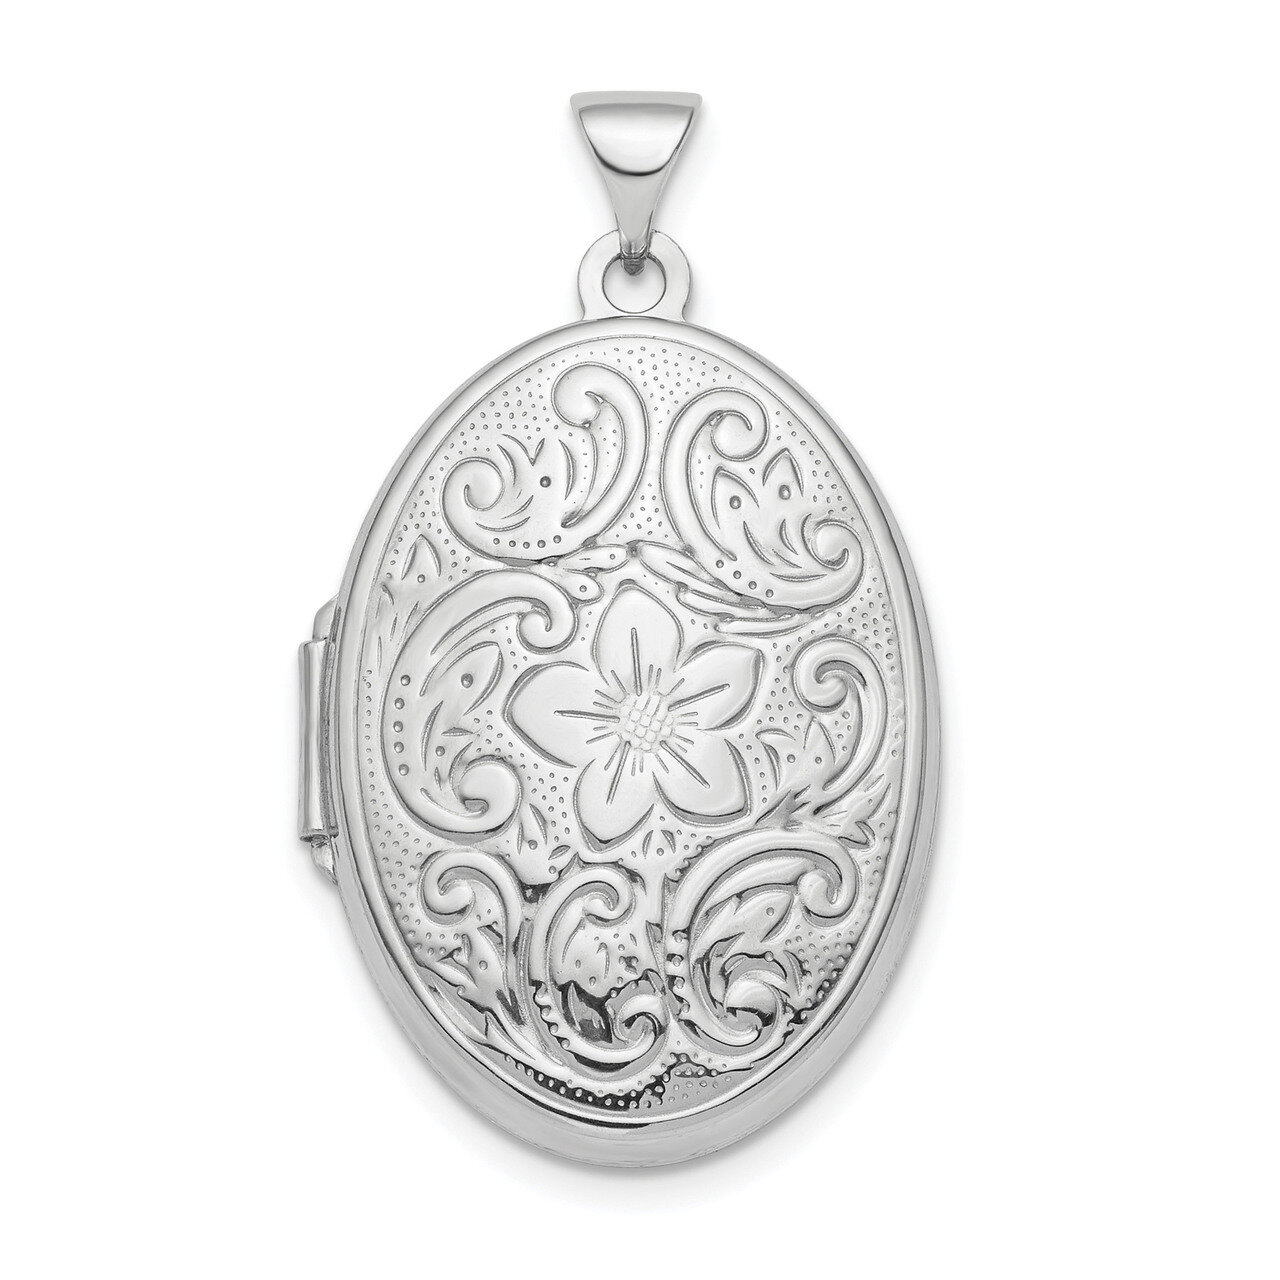 26mm Patterned Oval Locket Sterling Silver Rhodium-plated Polished QLS860